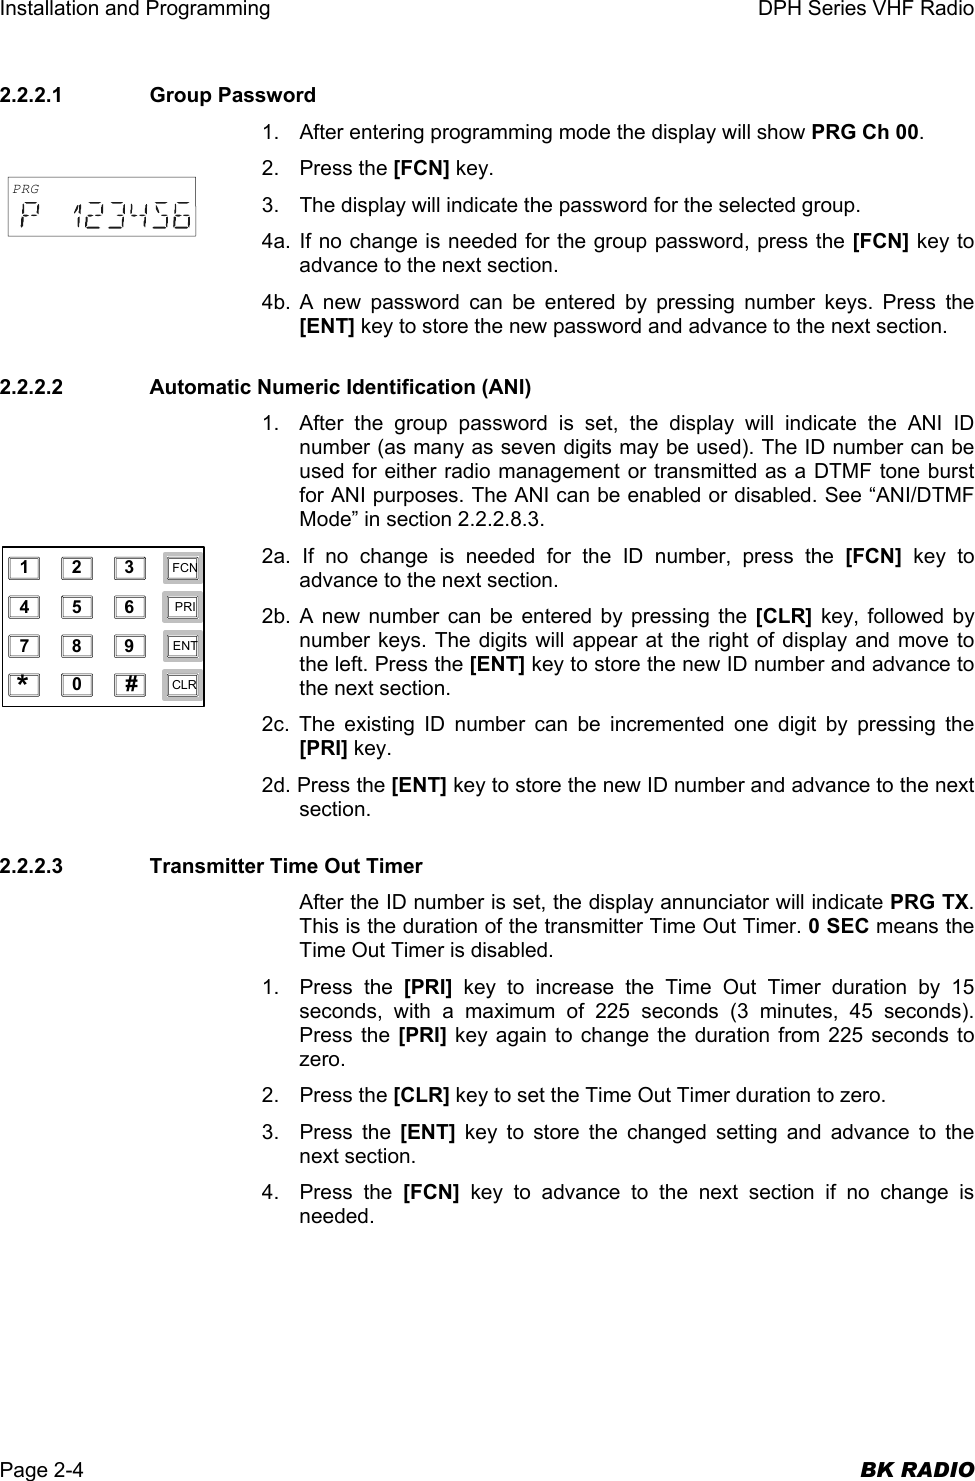 Installation and Programming  DPH Series VHF Radio  Page 2-4  BK RADIO 2.2.2.1   Group Password 1.  After entering programming mode the display will show PRG Ch 00. 2. Press the [FCN] key. 3.  The display will indicate the password for the selected group. 4a. If no change is needed for the group password, press the [FCN] key to advance to the next section. 4b. A new password can be entered by pressing number keys. Press the [ENT] key to store the new password and advance to the next section. 2.2.2.2    Automatic Numeric Identification (ANI) 1.  After the group password is set, the display will indicate the ANI ID number (as many as seven digits may be used). The ID number can be used for either radio management or transmitted as a DTMF tone burst for ANI purposes. The ANI can be enabled or disabled. See “ANI/DTMF Mode” in section 2.2.2.8.3. 2a. If no change is needed for the ID number, press the [FCN] key to advance to the next section. 2b. A new number can be entered by pressing the [CLR] key, followed by number keys. The digits will appear at the right of display and move to the left. Press the [ENT] key to store the new ID number and advance to the next section. 2c. The existing ID number can be incremented one digit by pressing the [PRI] key. 2d. Press the [ENT] key to store the new ID number and advance to the next section. 2.2.2.3    Transmitter Time Out Timer After the ID number is set, the display annunciator will indicate PRG TX. This is the duration of the transmitter Time Out Timer. 0 SEC means the Time Out Timer is disabled. 1. Press the [PRI] key to increase the Time Out Timer duration by 15 seconds, with a maximum of 225 seconds (3 minutes, 45 seconds). Press the [PRI] key again to change the duration from 225 seconds to zero. 2. Press the [CLR] key to set the Time Out Timer duration to zero. 3. Press the [ENT] key to store the changed setting and advance to the next section. 4. Press the [FCN] key to advance to the next section if no change is needed. 1234567890*#CLRFCNPRIENTPRG